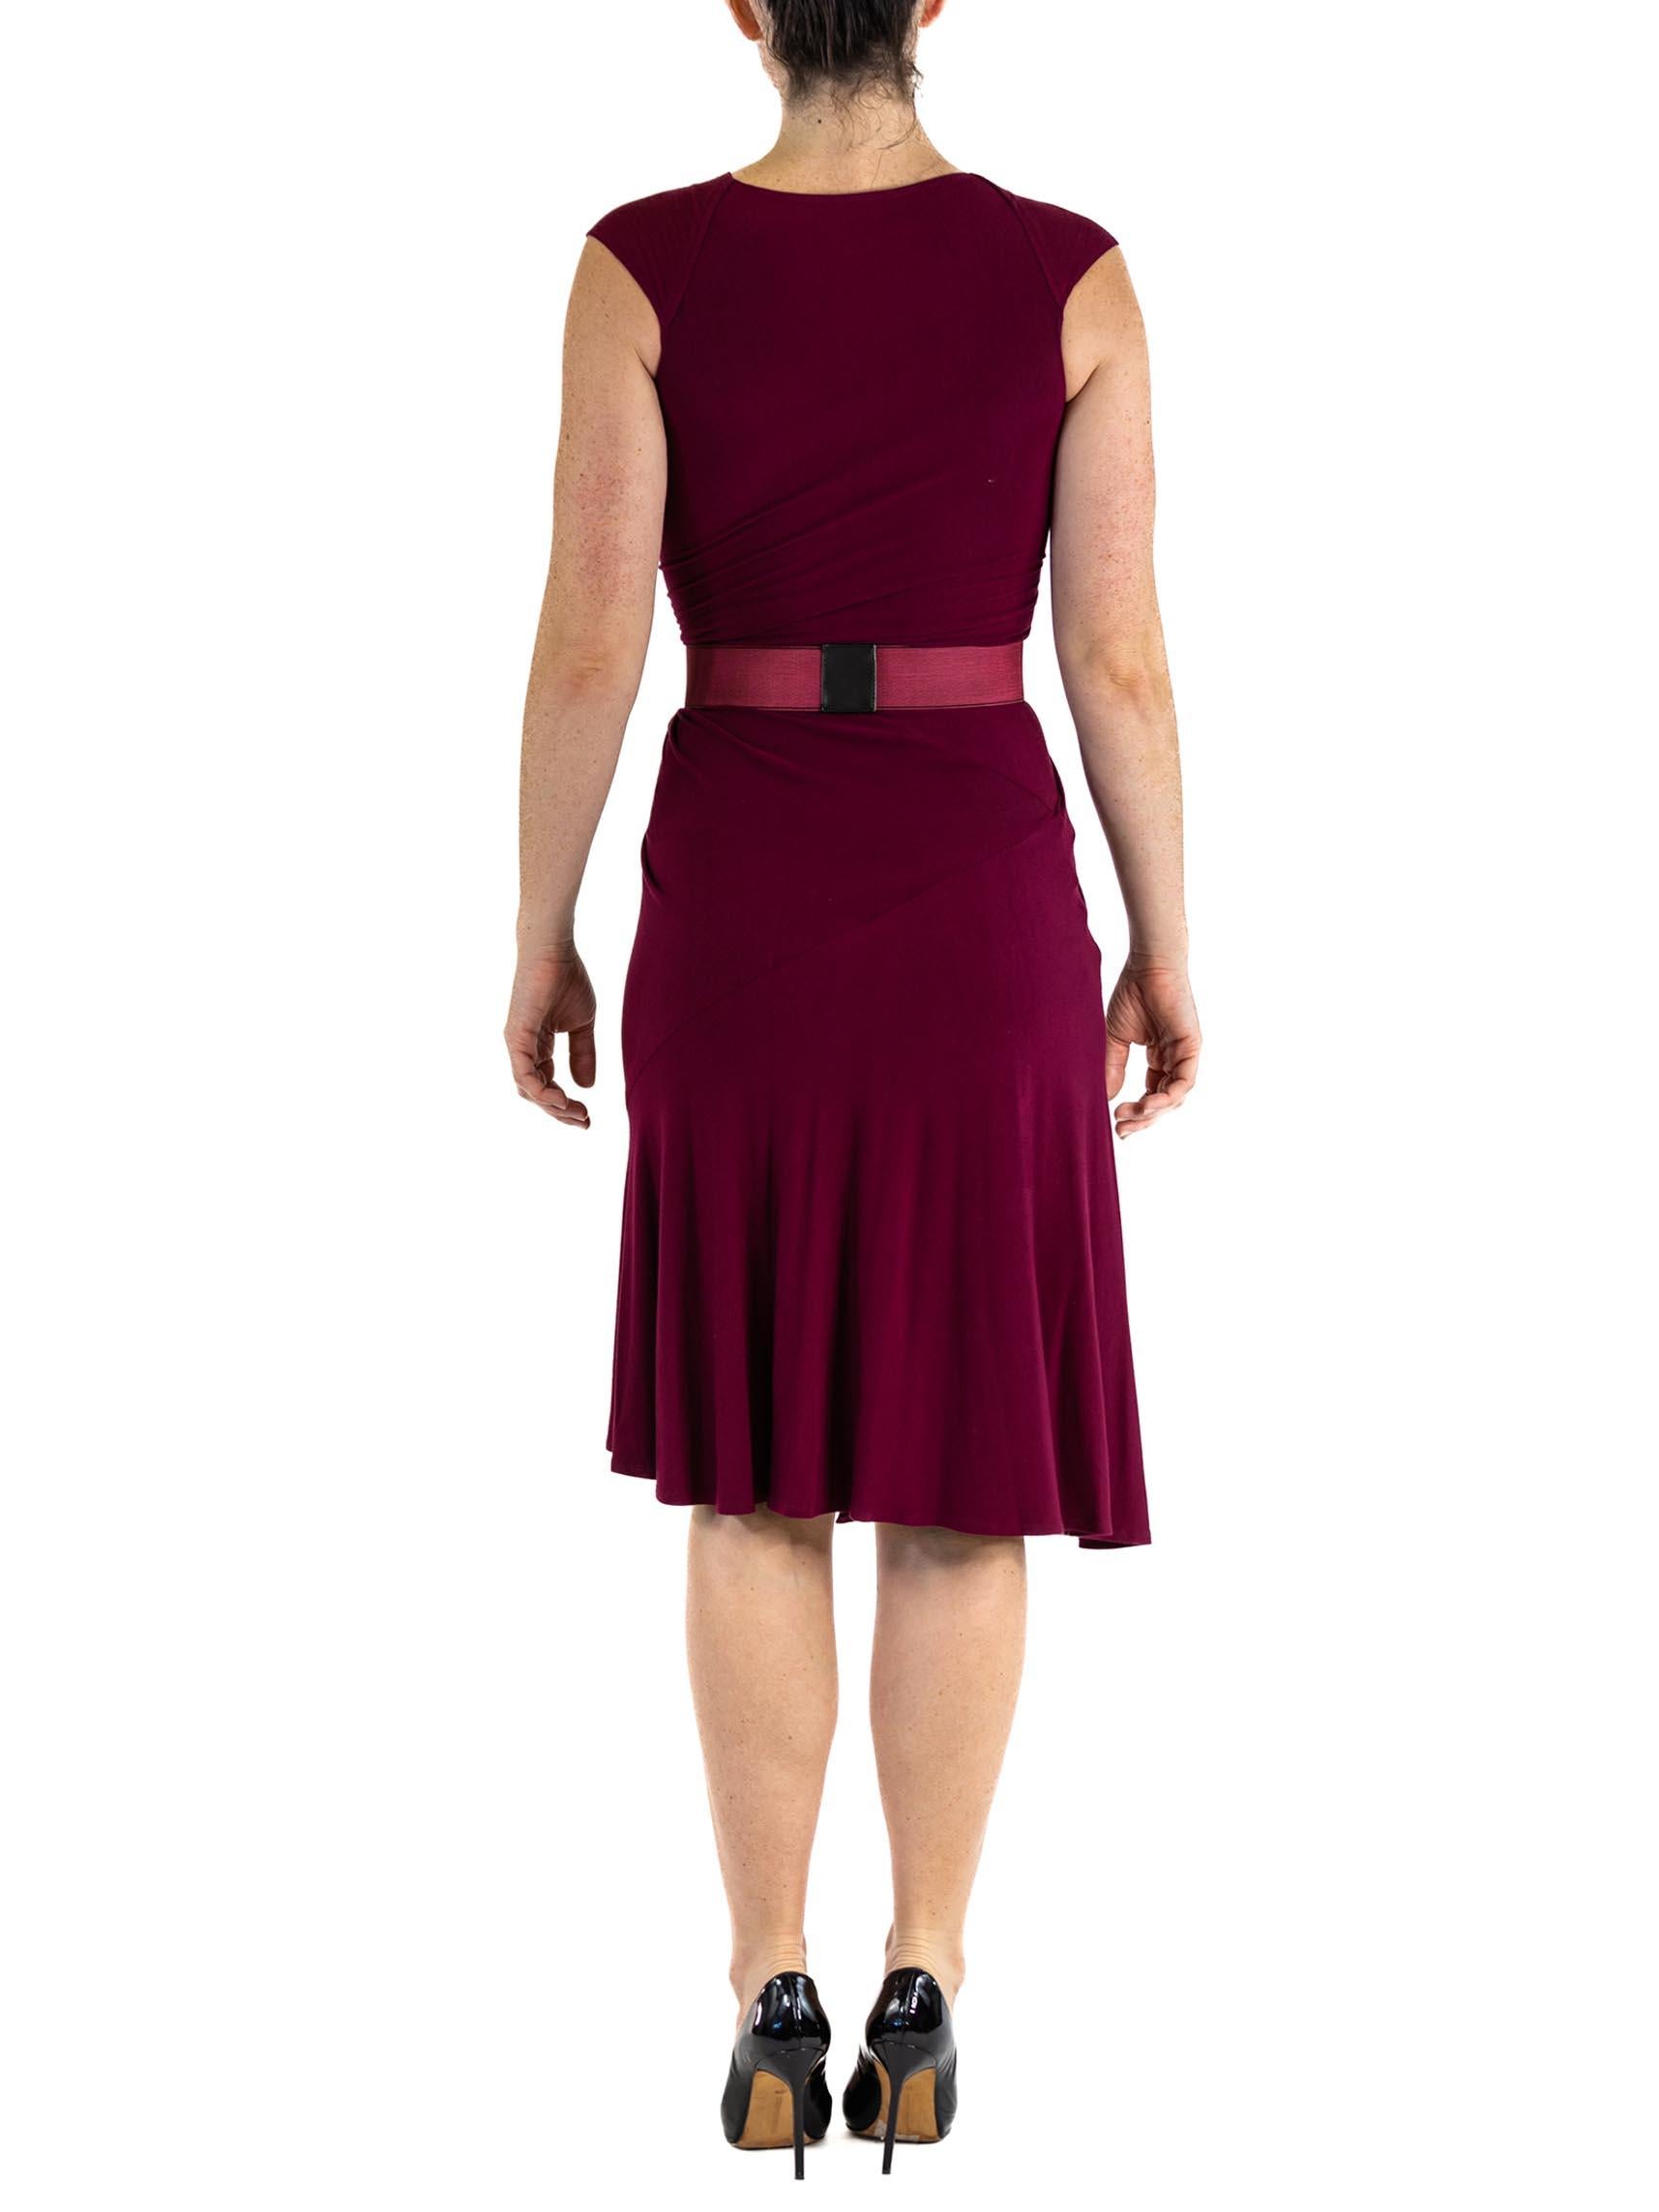 Women's 2000S DONNA KARAN Garnet Red Rayon Jersey Knot Front Ruched Dress With Belt For Sale